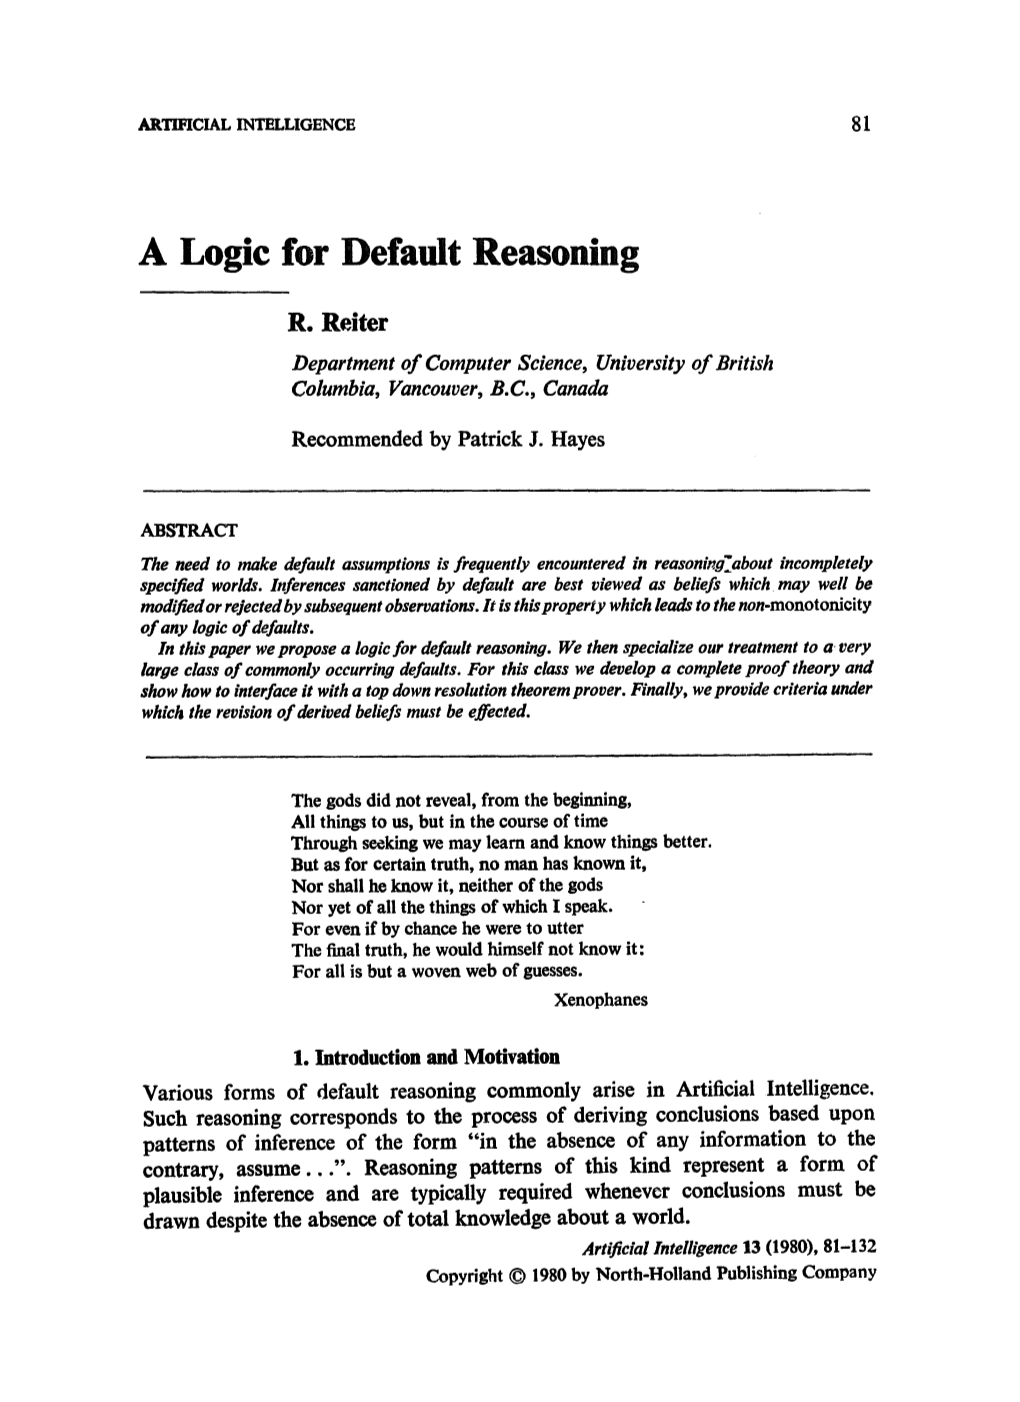 A Logic for Default Reasoning